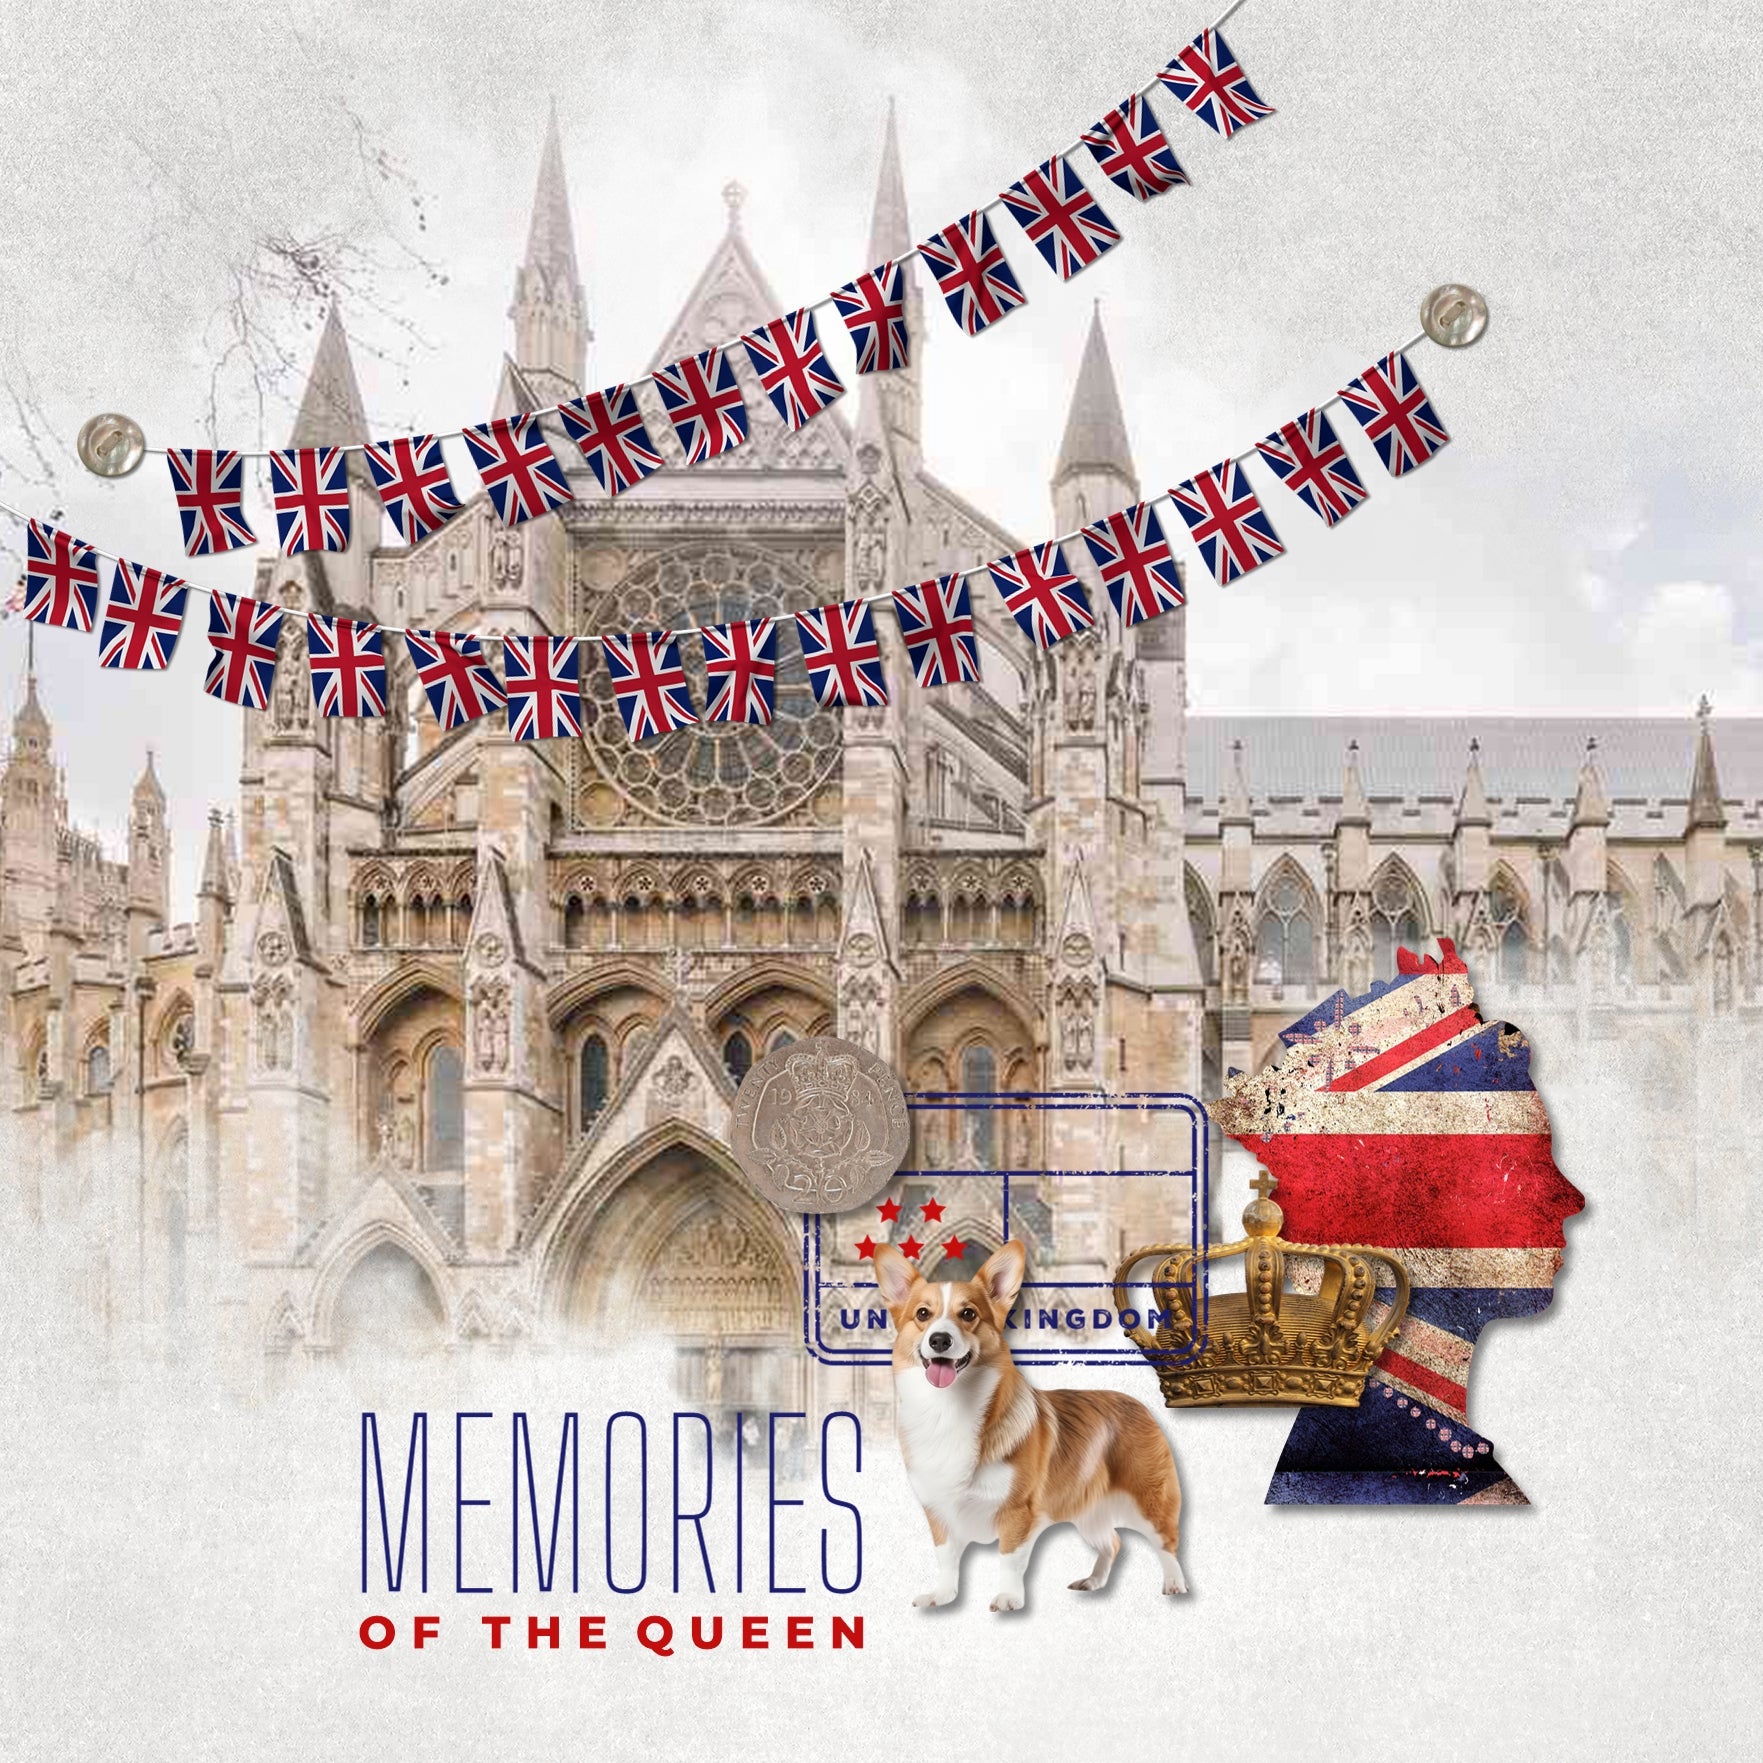 Celebrate the United Kingdom, England, Scotland, Northern Ireland, and Wales with these fun digital postmarks and stamps by Lucky Girl Creative. Great for layering on your vacation and holiday digital pages. Postmarks include Royal Mail, Wish You Were Here, Cheerio, England, God Save the King, God Save the Queen, Itinerary, London England, Museum, Northern Ireland, Royal Family, Scotland, Snapshots, The Commonwealth, The Pub, Travel, United Kingdom, and Wales.